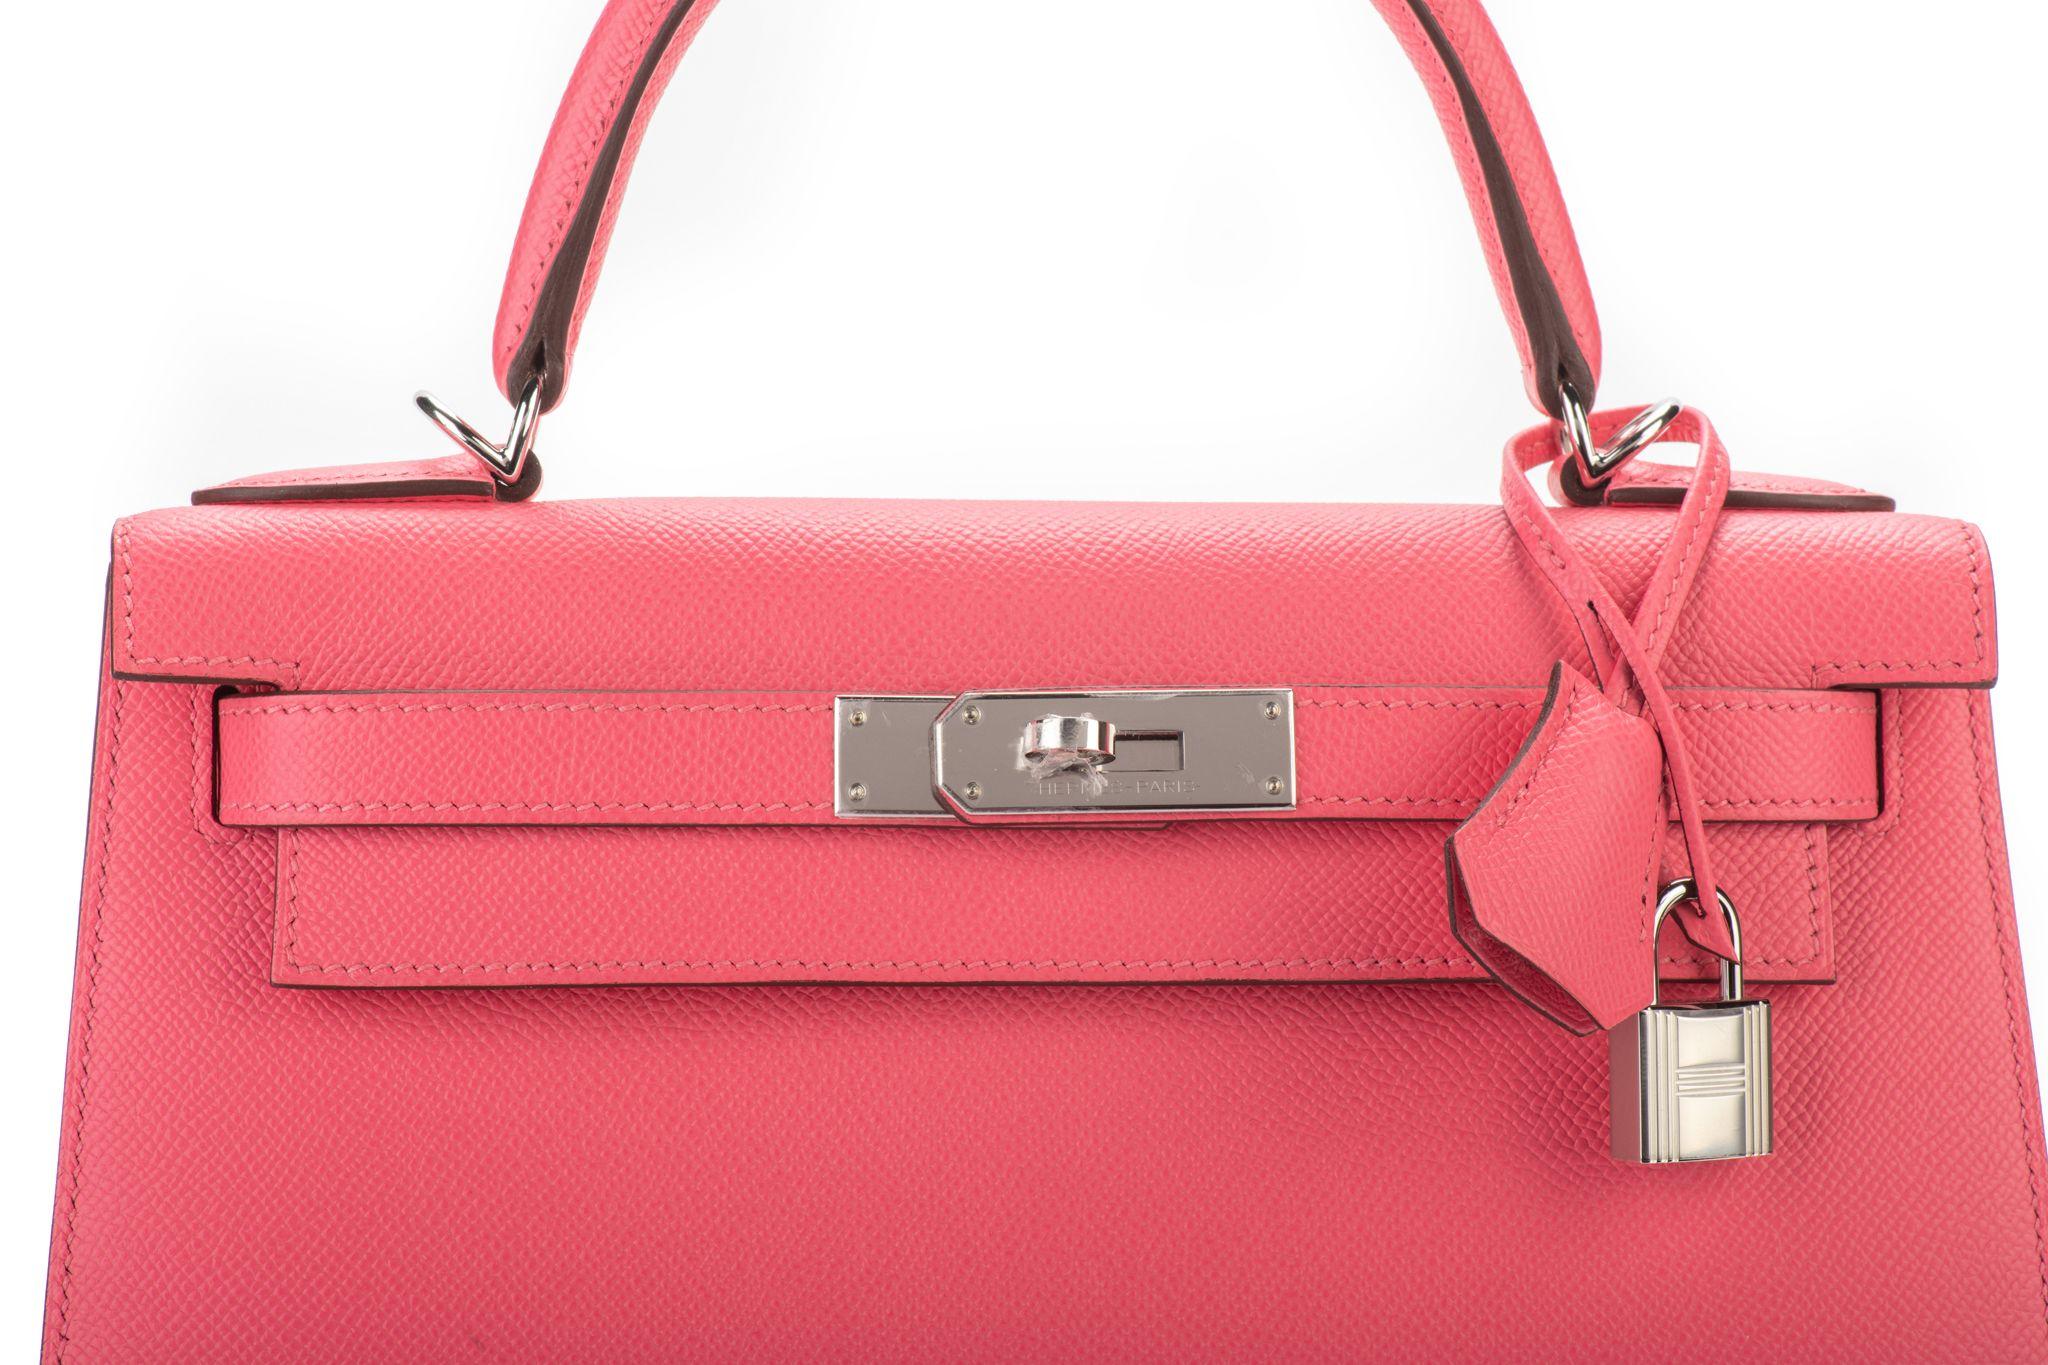 Hermes BNIB Kelly 28 Rose Azalee Epsom  In New Condition For Sale In West Hollywood, CA